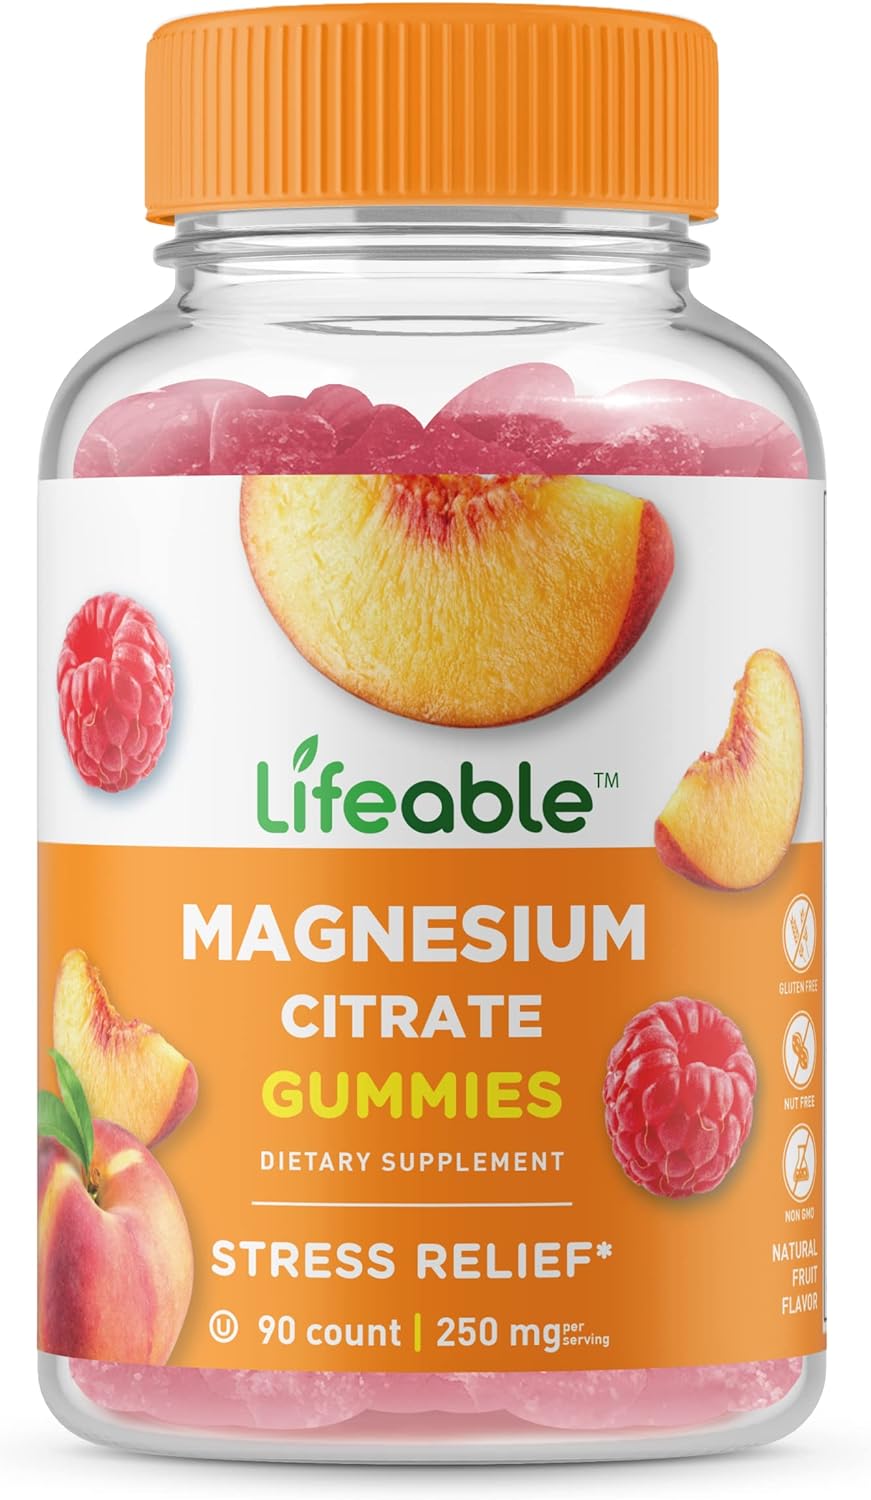 Lifeable Extra Strength Magnesium - 250mg Elemental Magnesium from 2,130mg Magnesium Citrate - Great Tasting Gummy Suppl